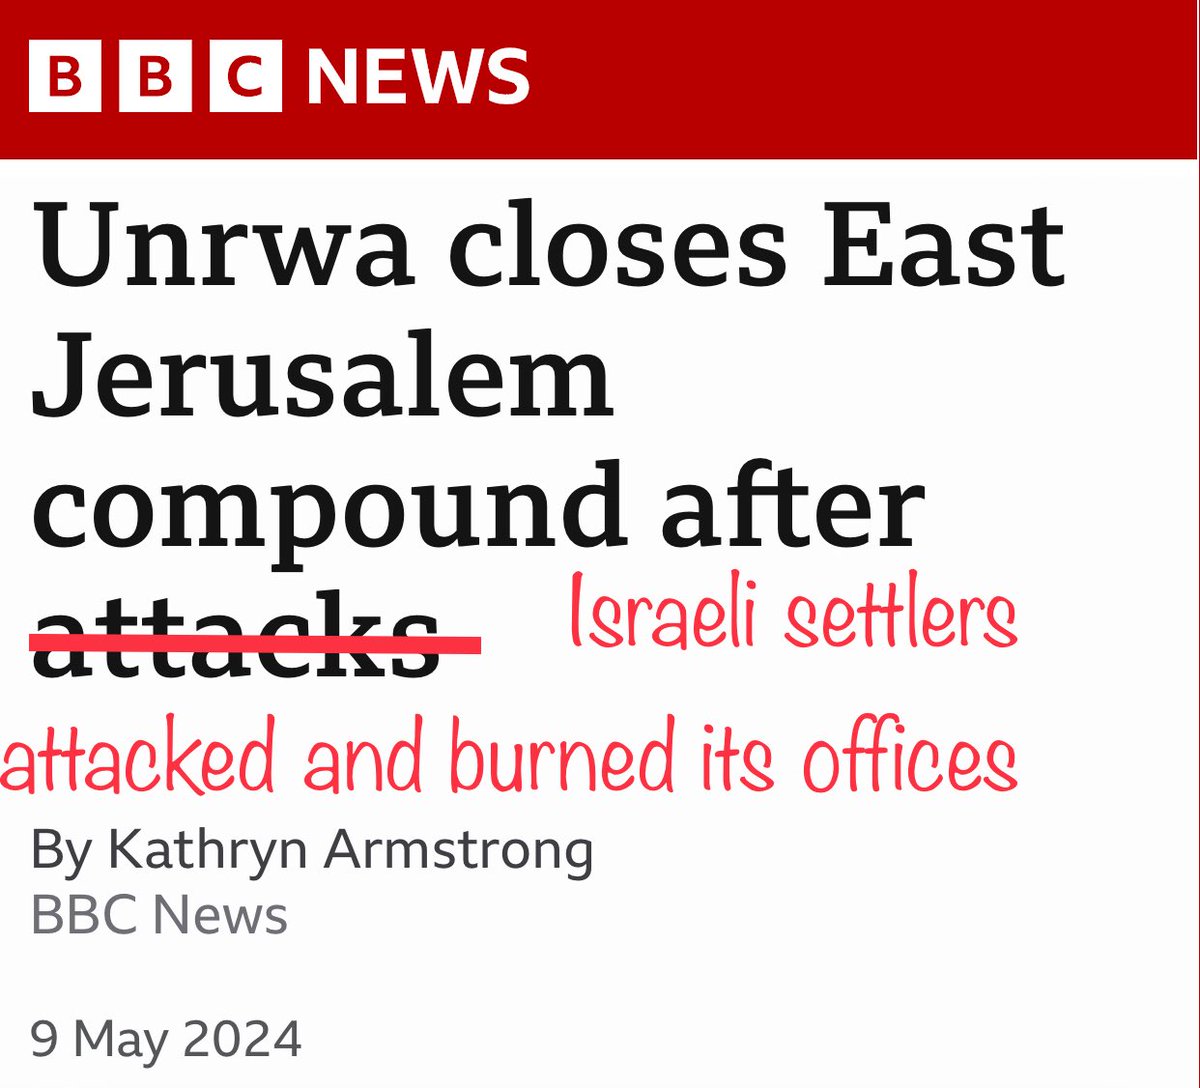 Fixed because BBC can’t name the assailants